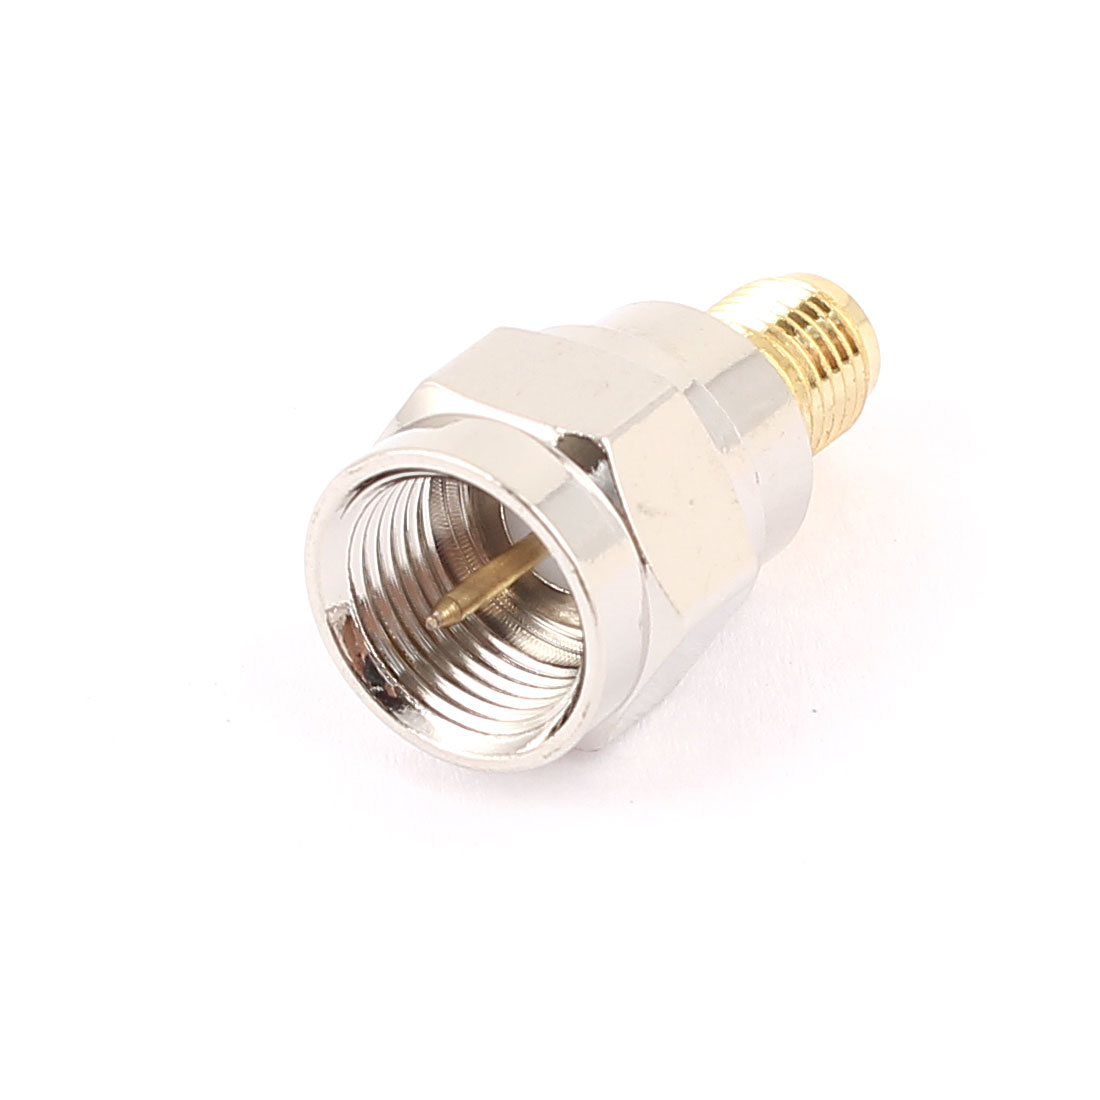 F Type Male to SMA Female Connector Adapter SMA/F to F/M